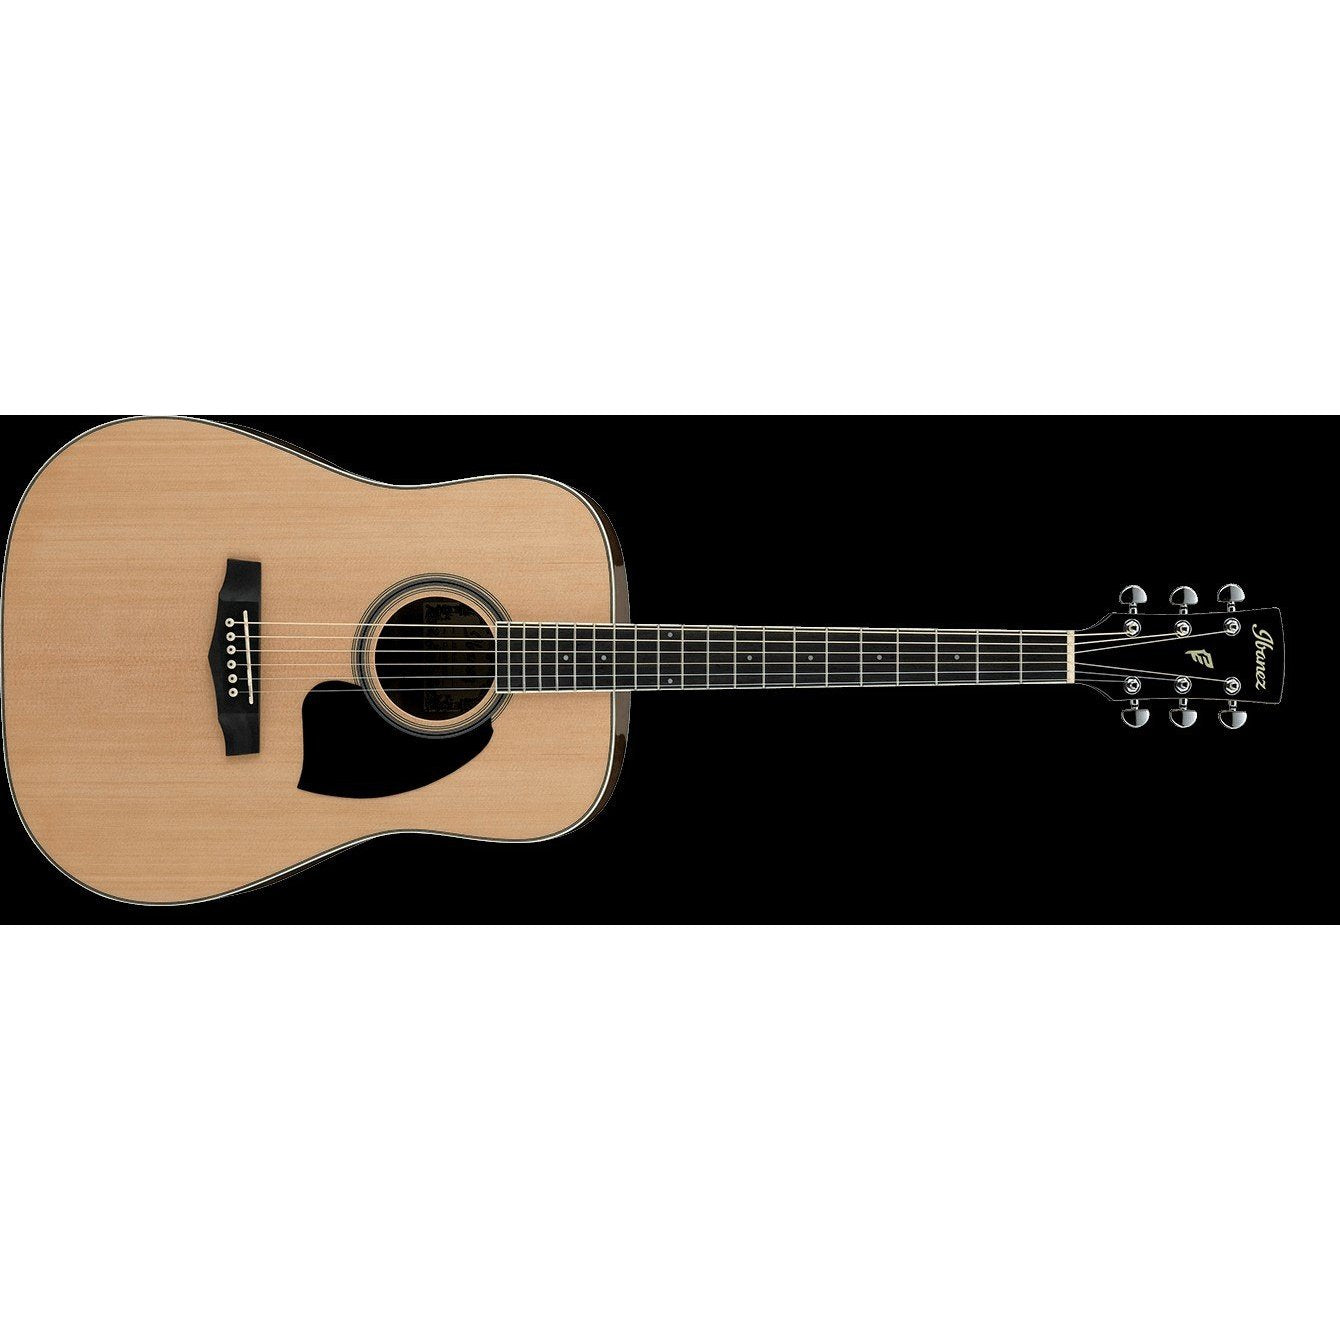 Ibanez PF15-NT PF Series Acoustic Guitar-Natural-Music World Academy